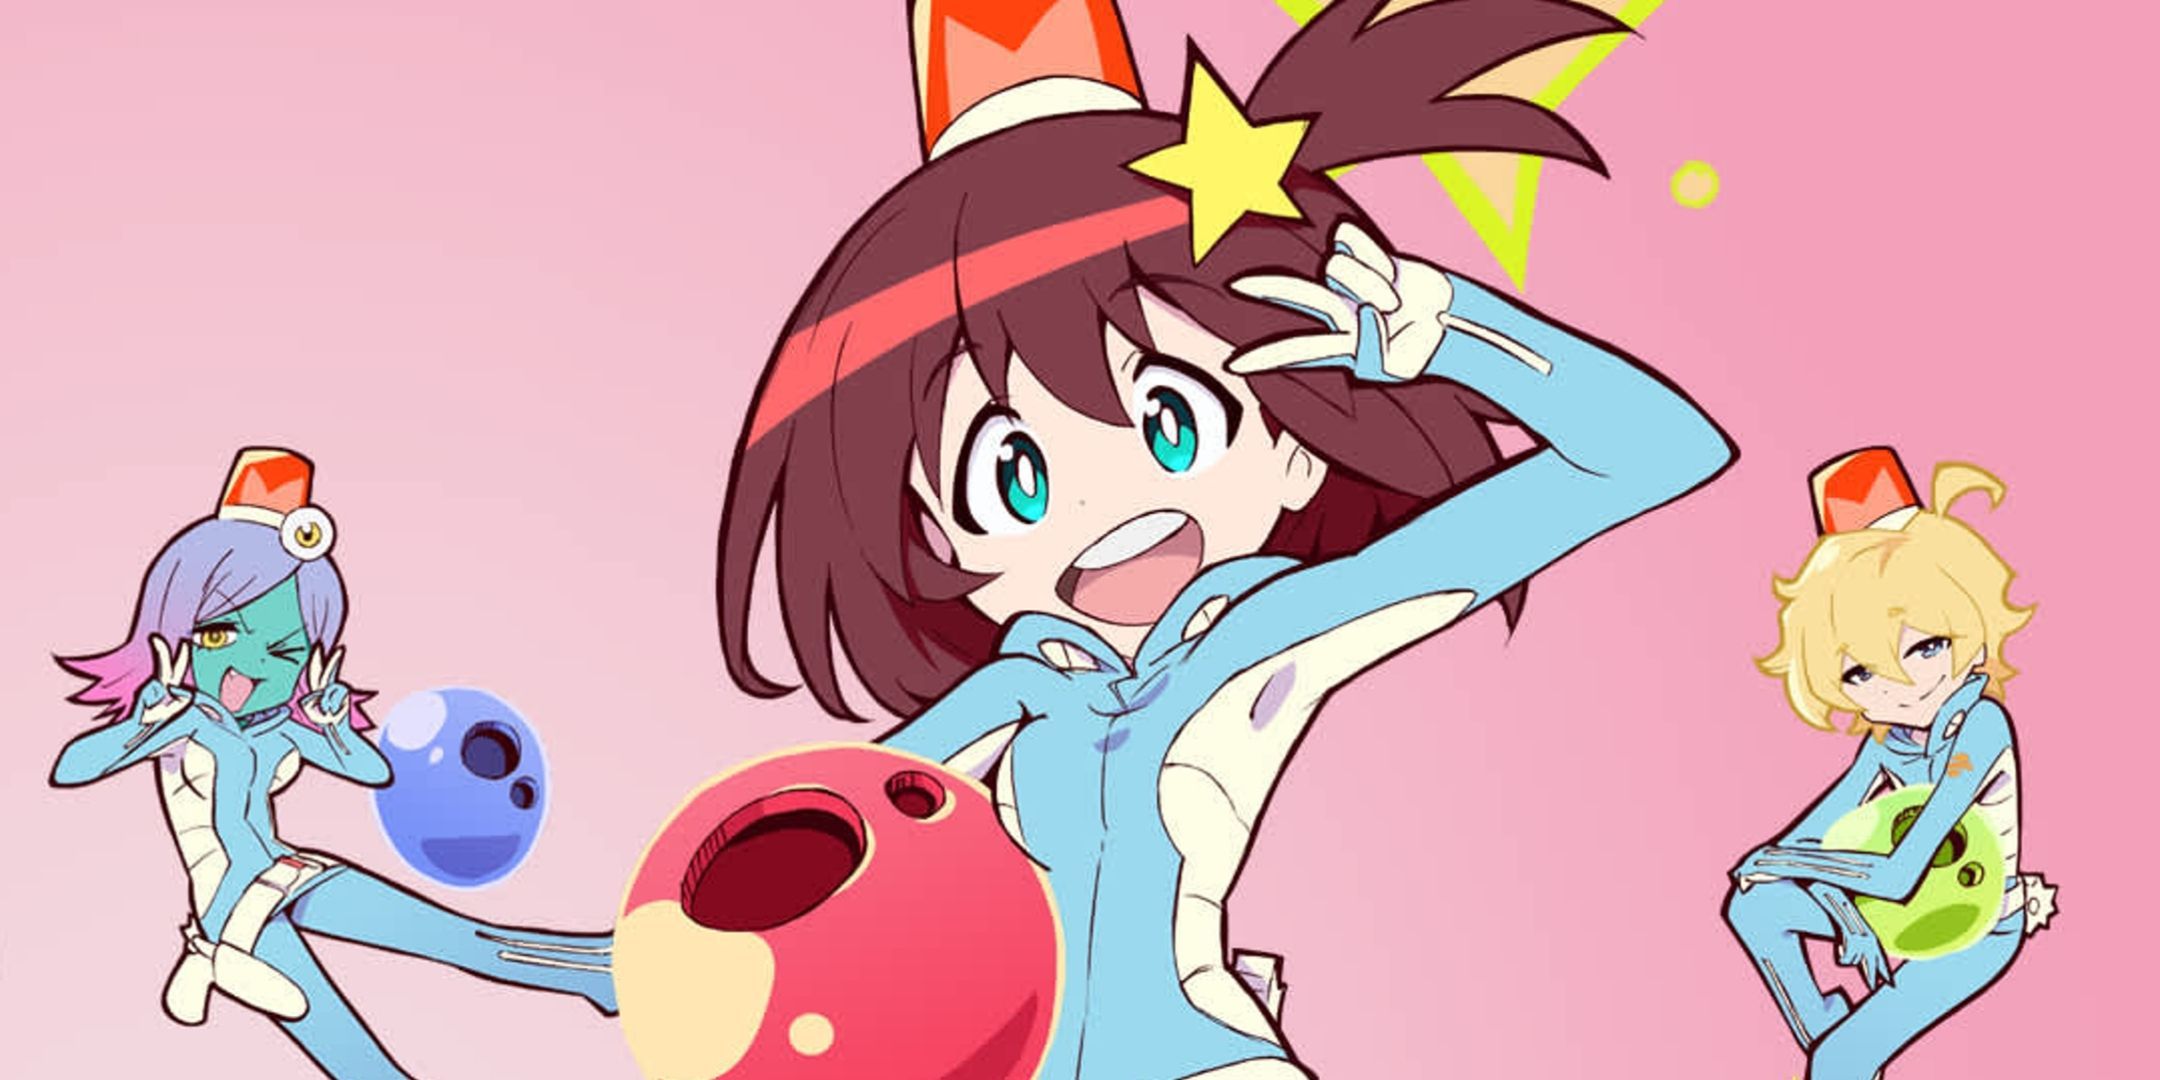 Luluco and company in Trigger's Space Patrol Luluco